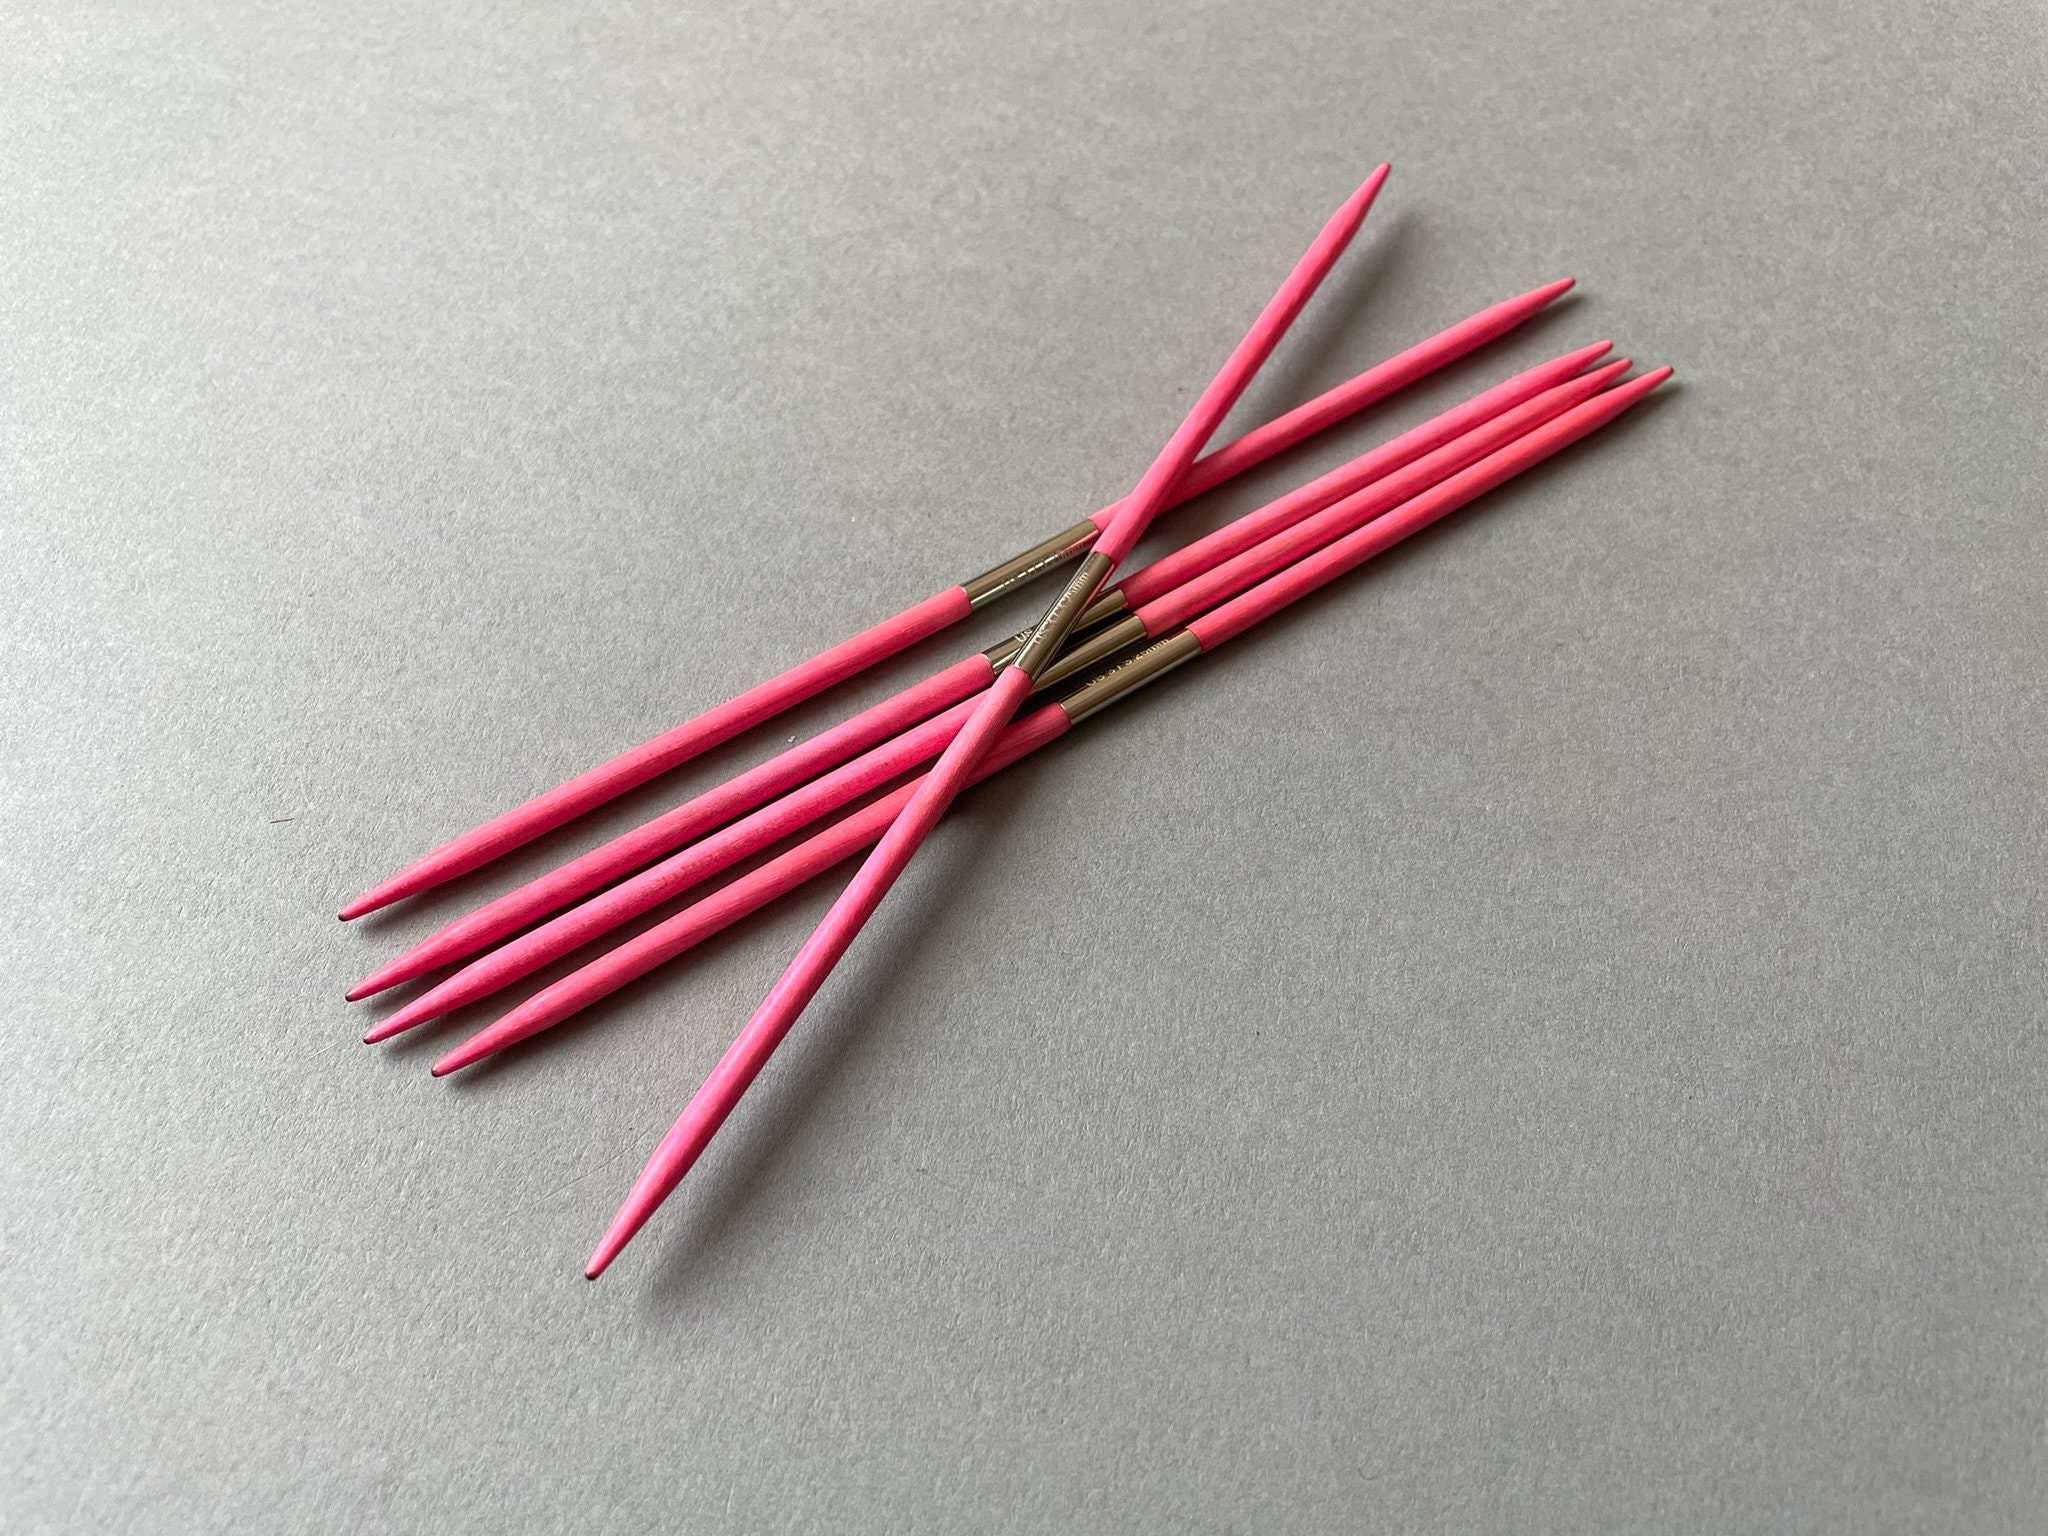 Premium Large Eye Gage Needles For Hand Sewing And Embroidery Fabric And  Sew Sewn Needle From Lijiehan2016, $5.56